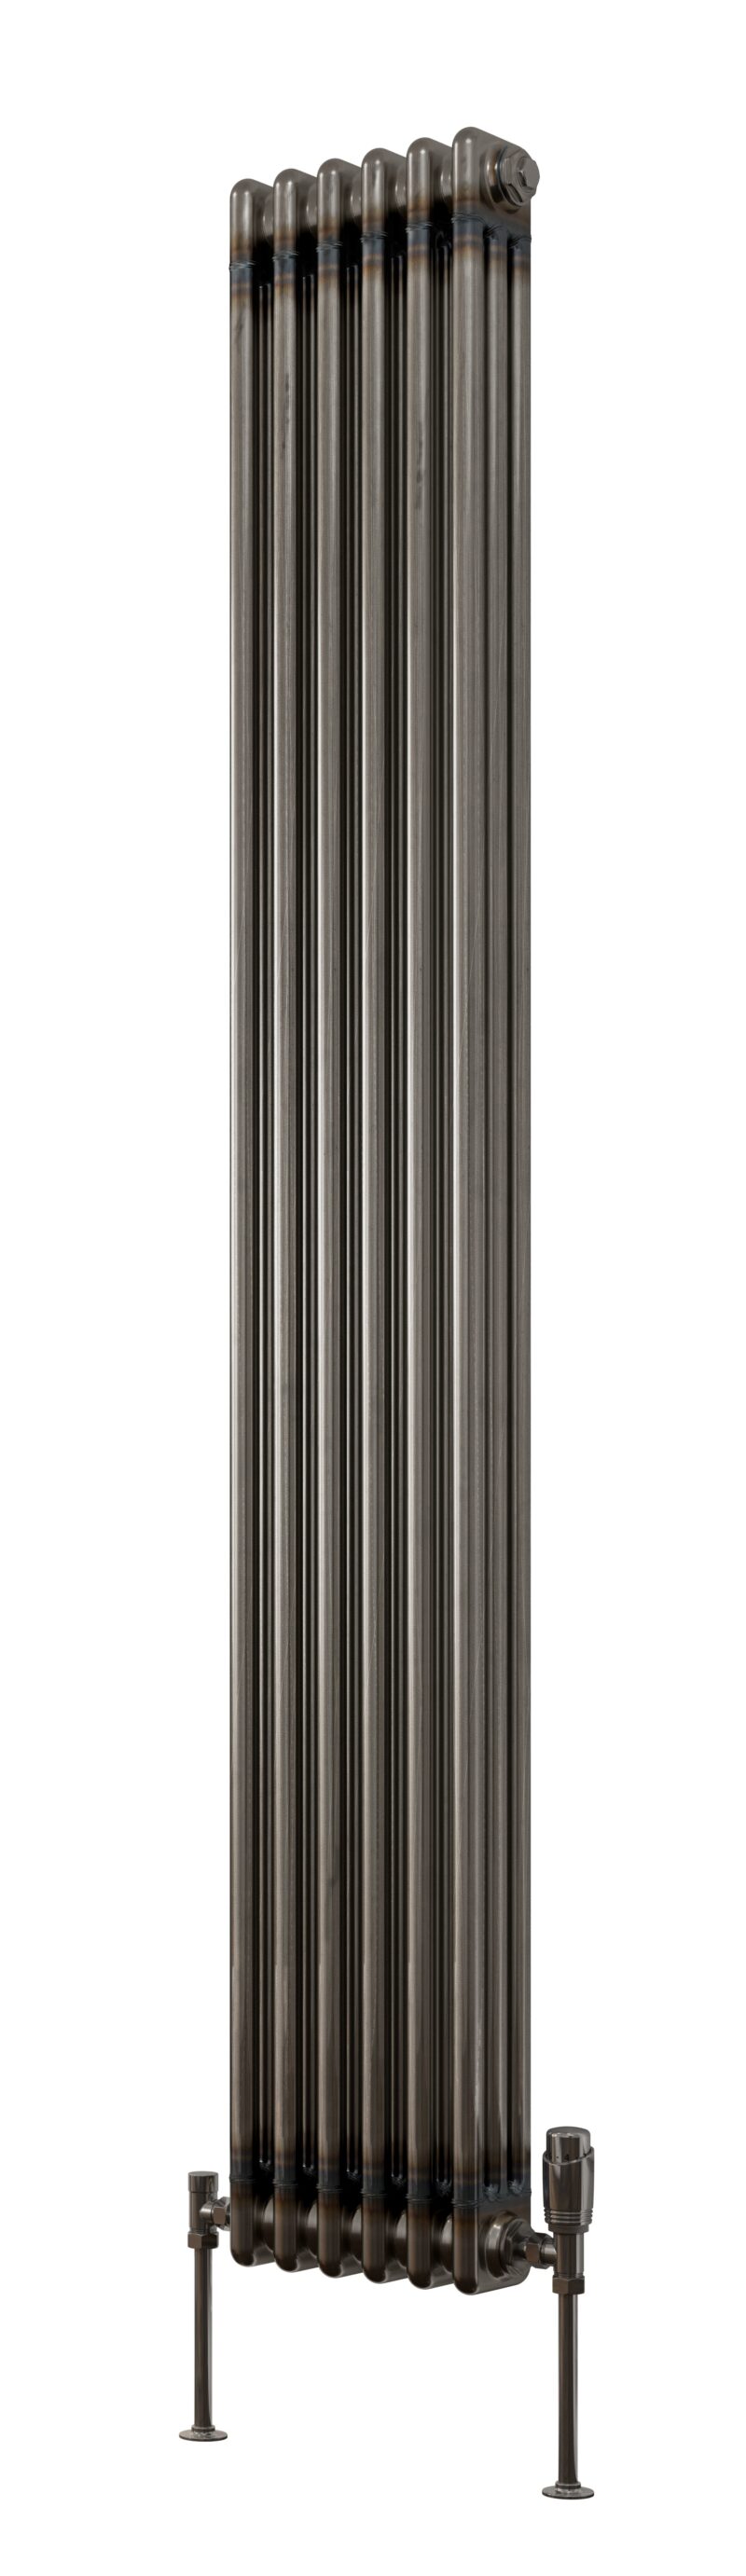 A vertical radiator in a kitchen adds a touch of style and warmth